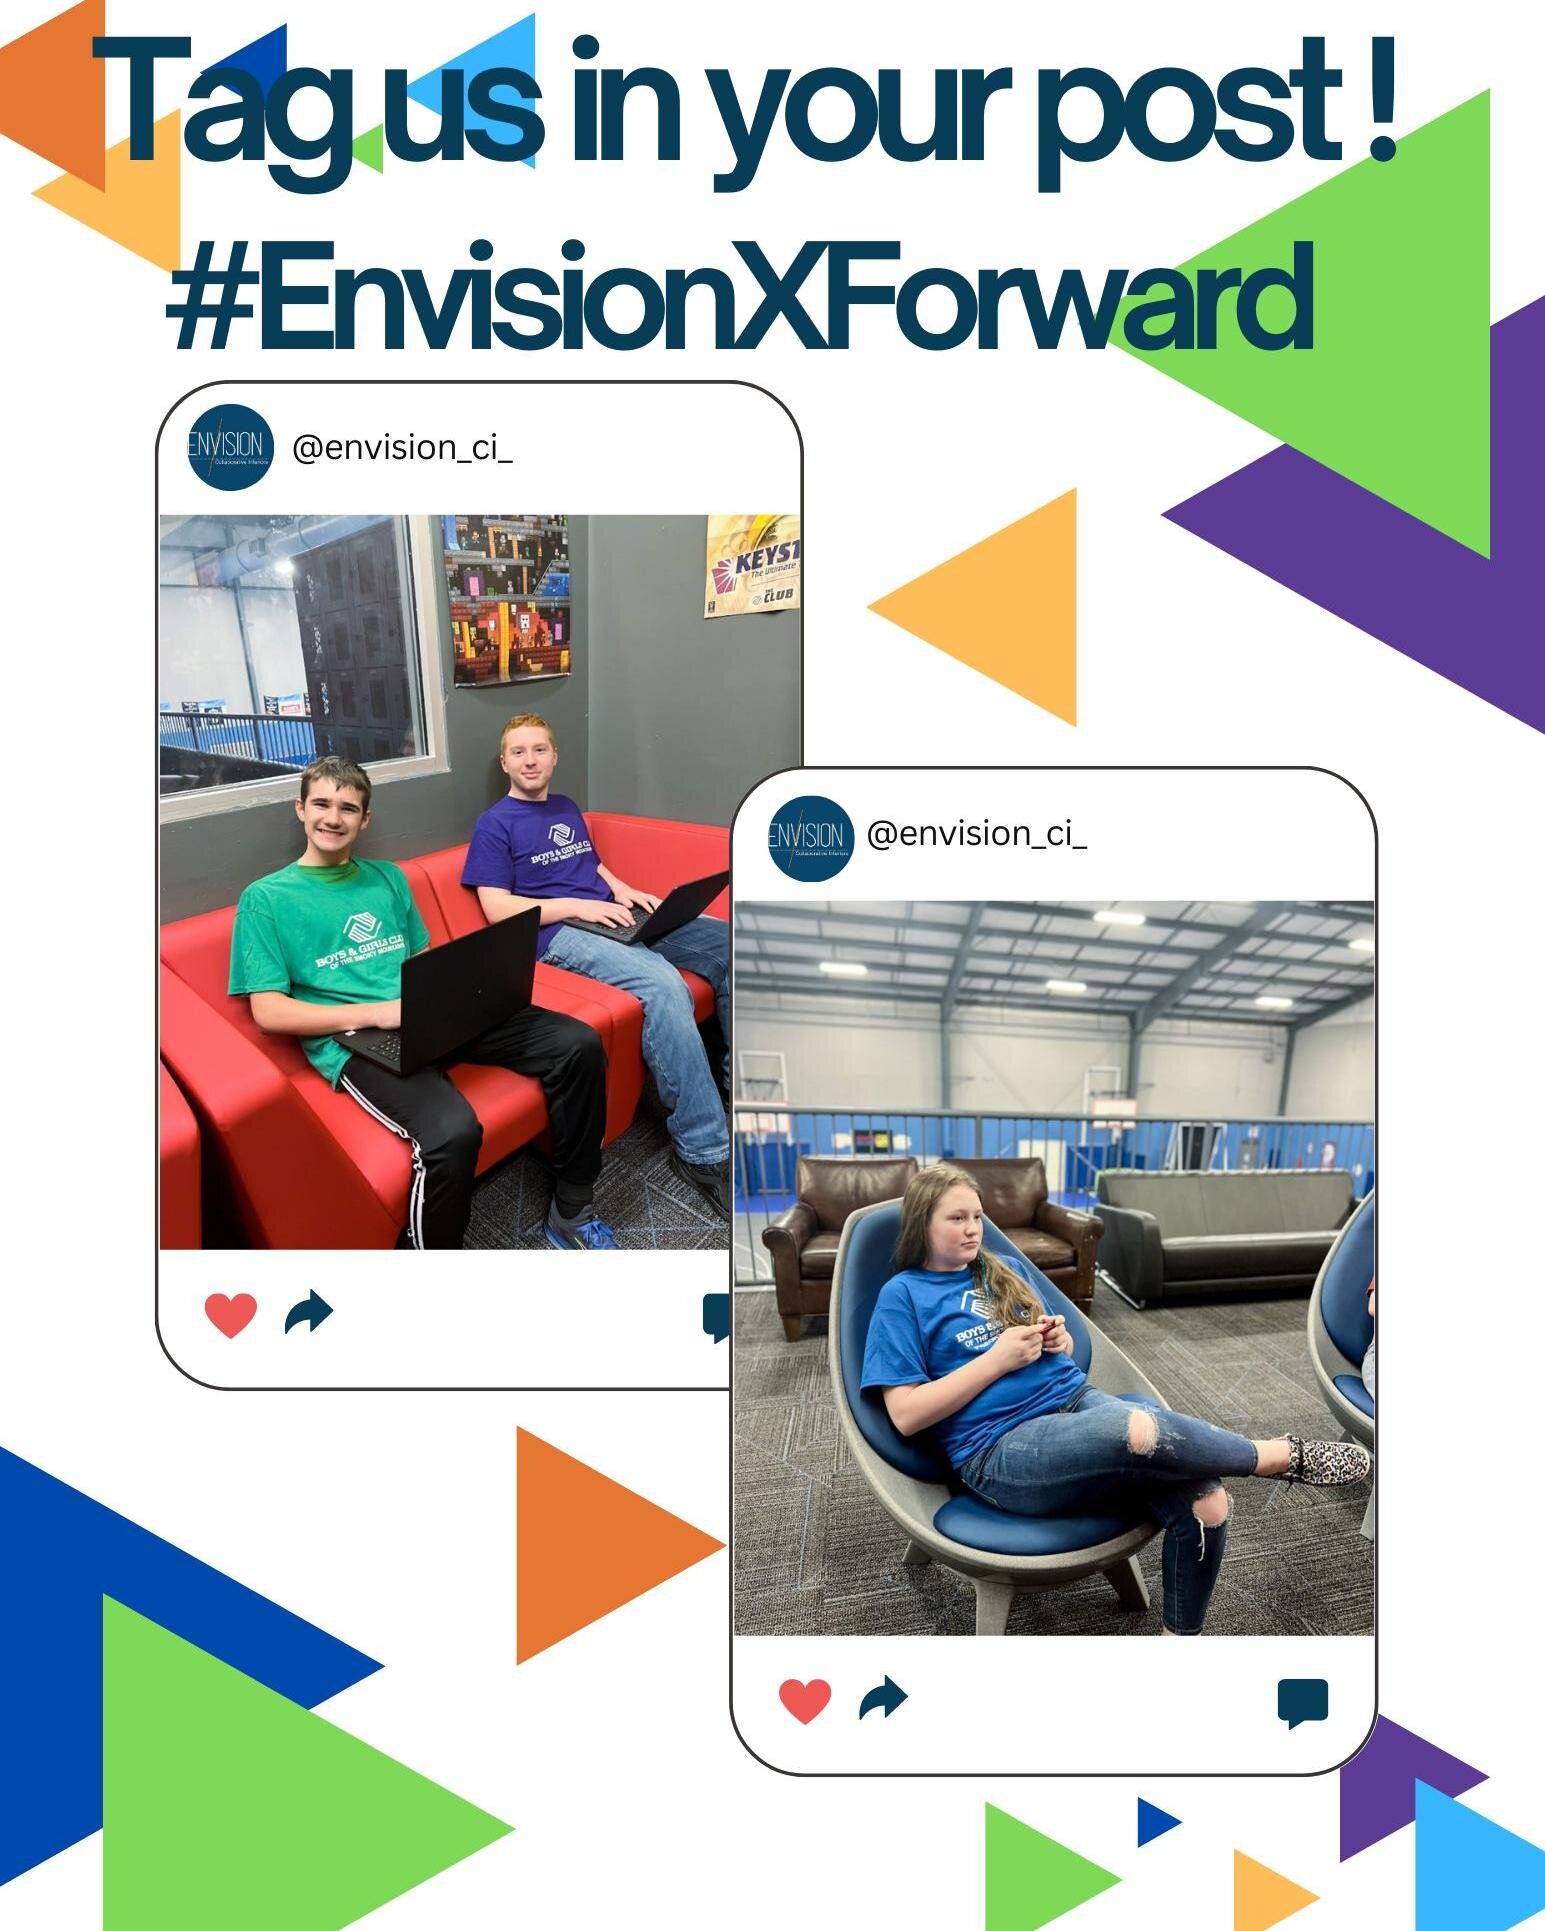 We are so excited to be at the Boys &amp; Girls Clubs of America National Conference this  week in Orlando! ☀️

Look for us at Booth 305 &amp; 307 and tag us in your post with #EnvisionXForward 

We may just have a giveaway you don't want to miss 😉